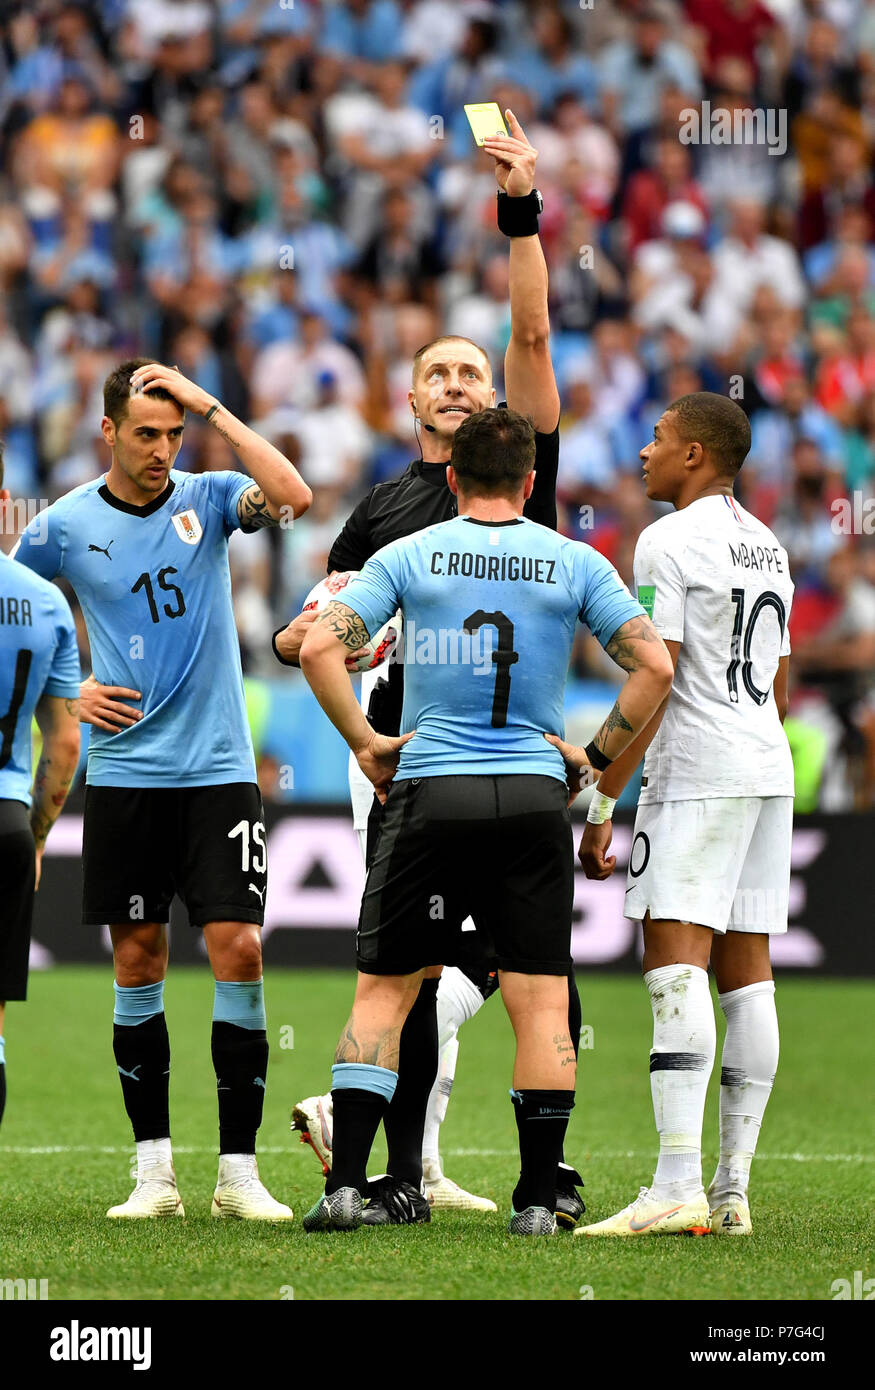 Nizhny Novgorod, Russia. 6th July, 2018. The referee gives a yellow card to Cristian Rodriguez (2nd R) of Uruguay during the 2018 FIFA World Cup quarter-final match between Uruguay and France in Nizhny Novgorod, Russia, July 6, 2018. France won 2-0 and advanced to the semi-finals. Credit: Liu Dawei/Xinhua/Alamy Live News Stock Photo